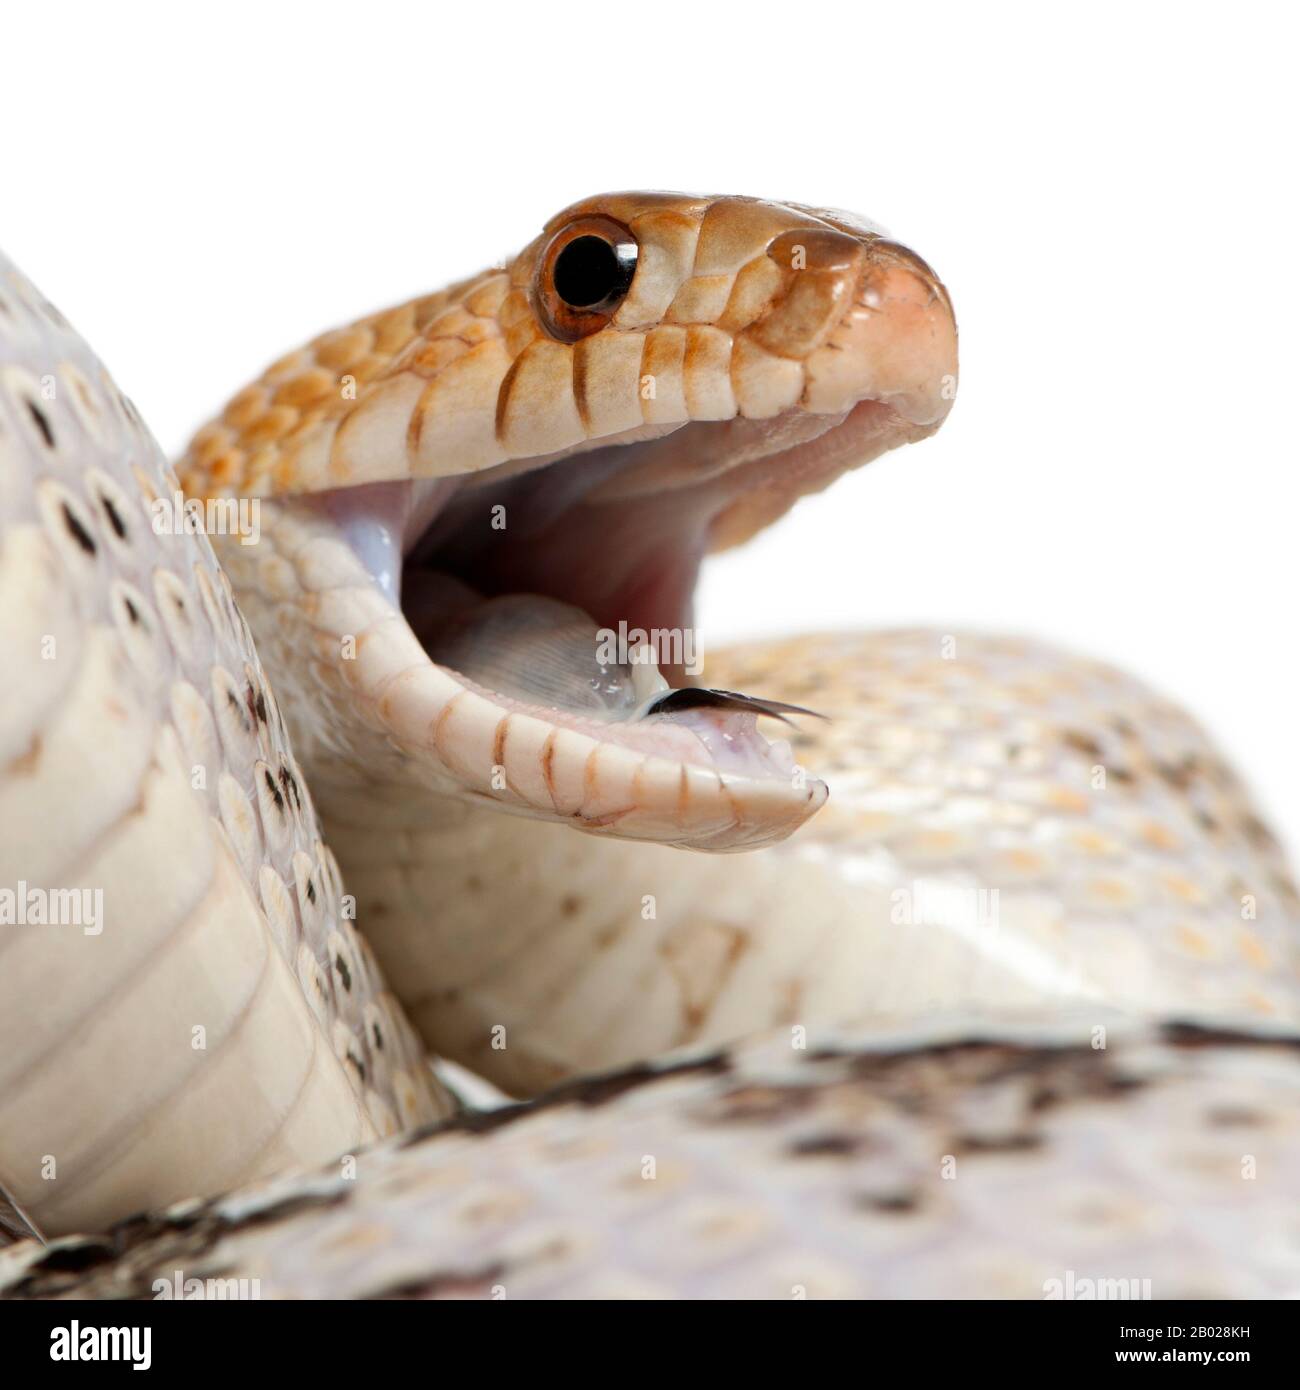 Pacific gopher snake also known as Coast gopher snake, western gopher snake, Pituophis catenifer, a colubrid species in front of white background Stock Photo